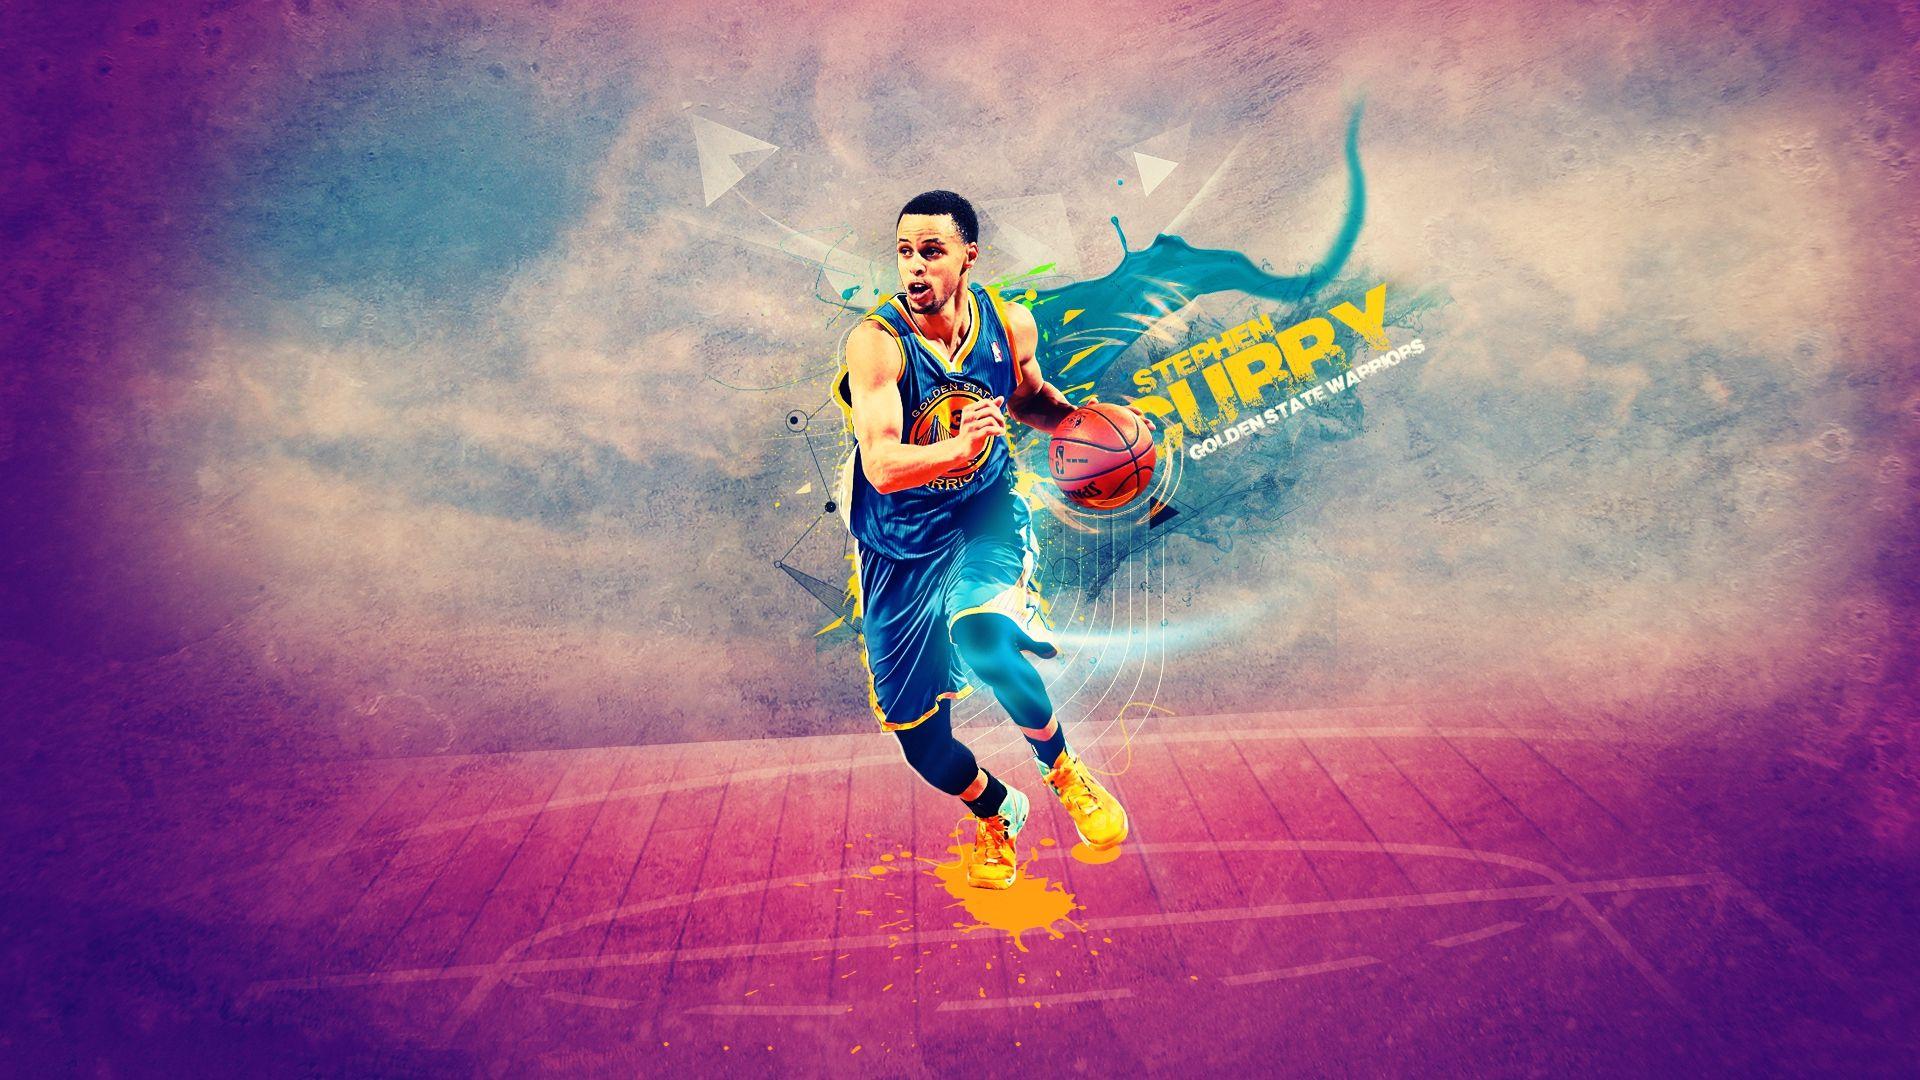 Wallpaper.wiki Stephen Curry Android Desktop Wallpaper PIC WPE003971